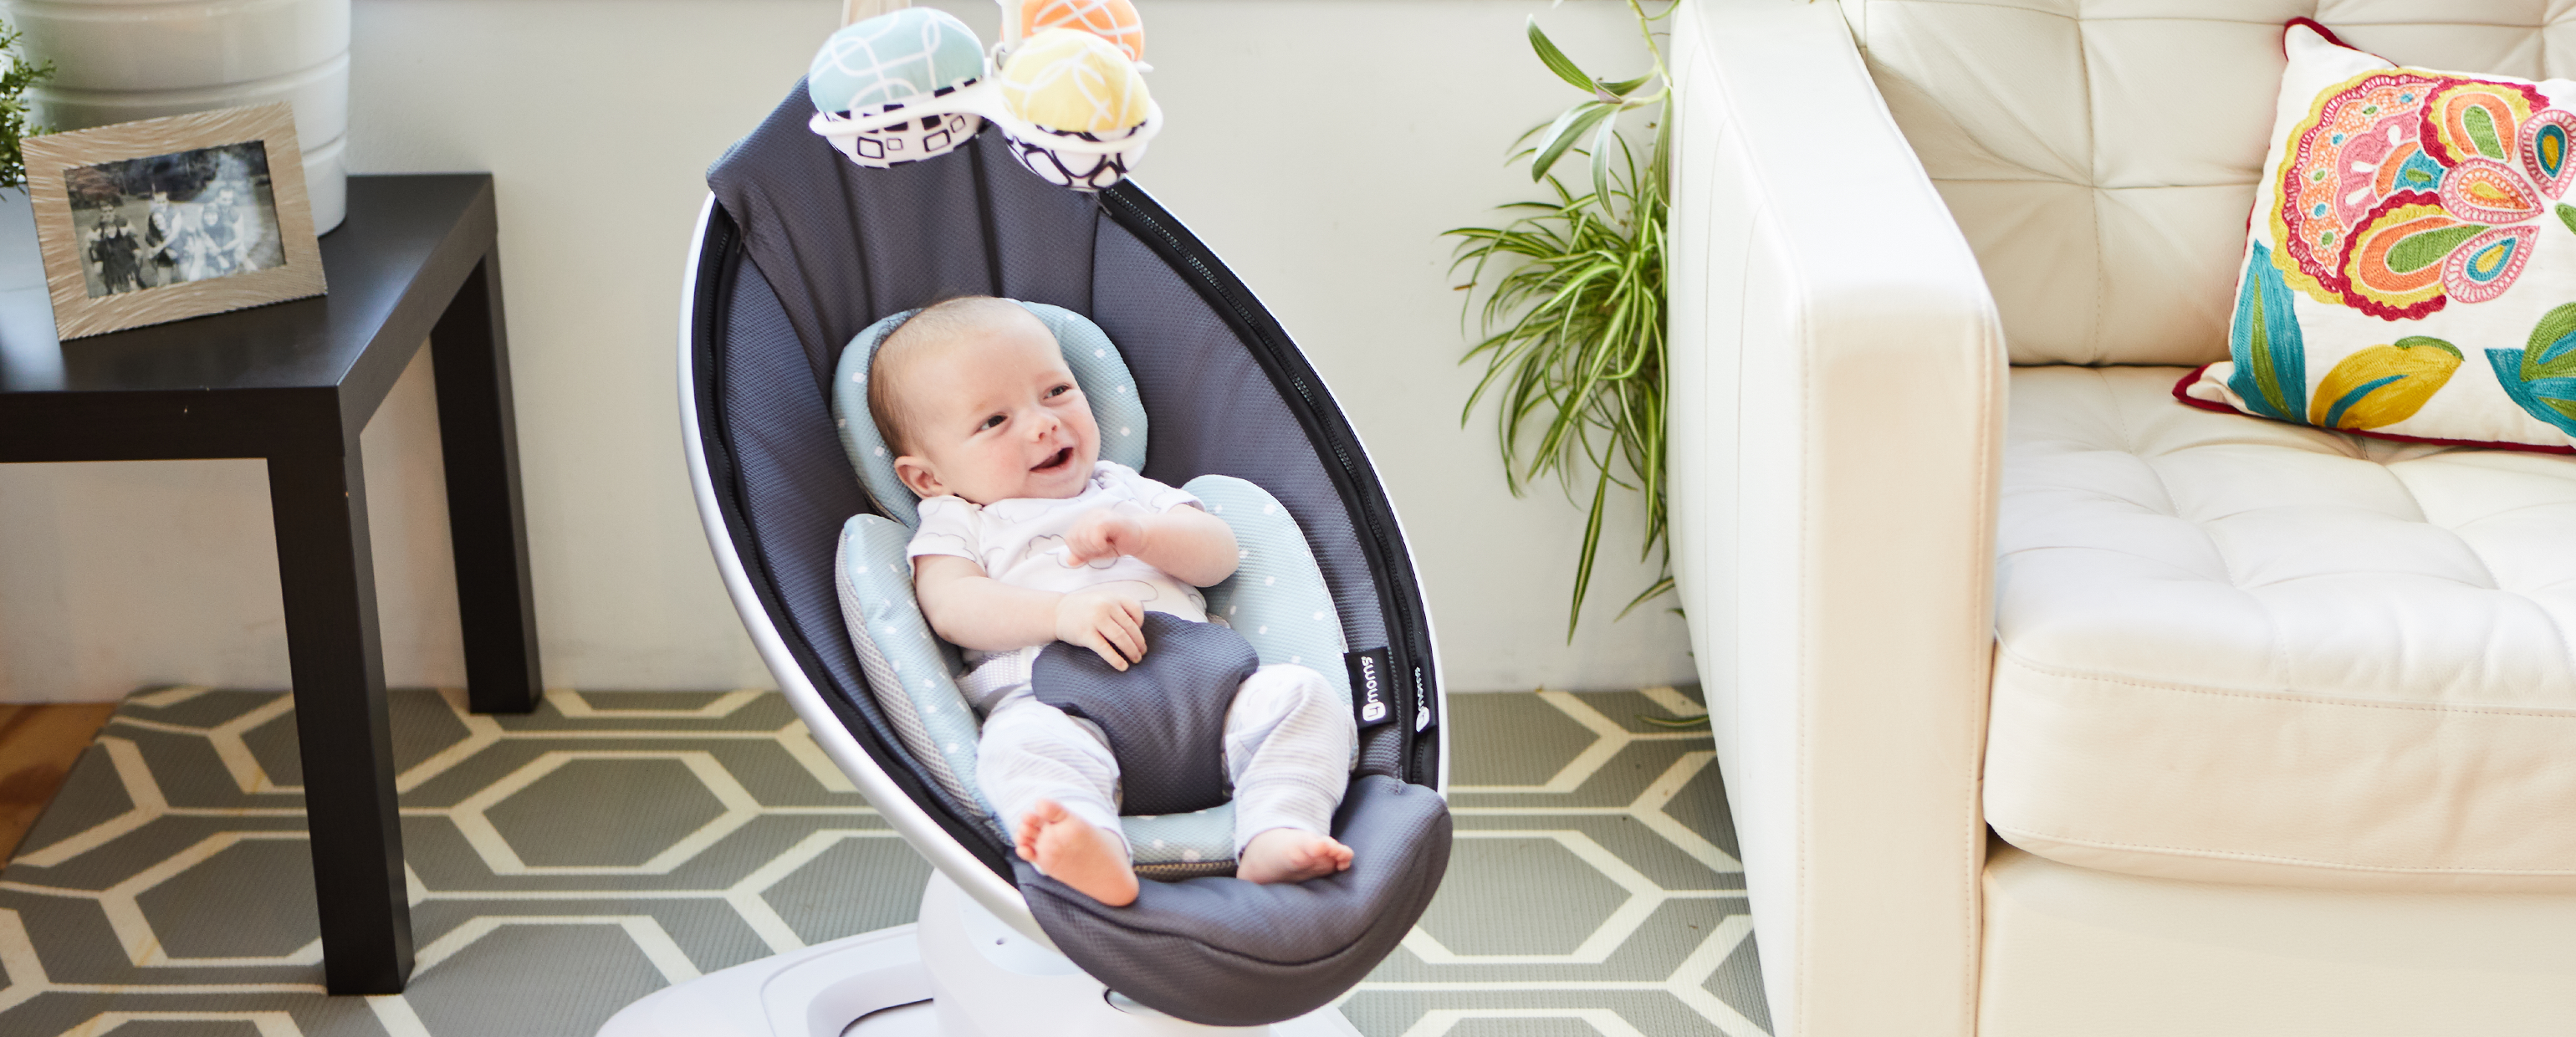 A Bluetooth Enabled Baby Swing That's Loved By Infants